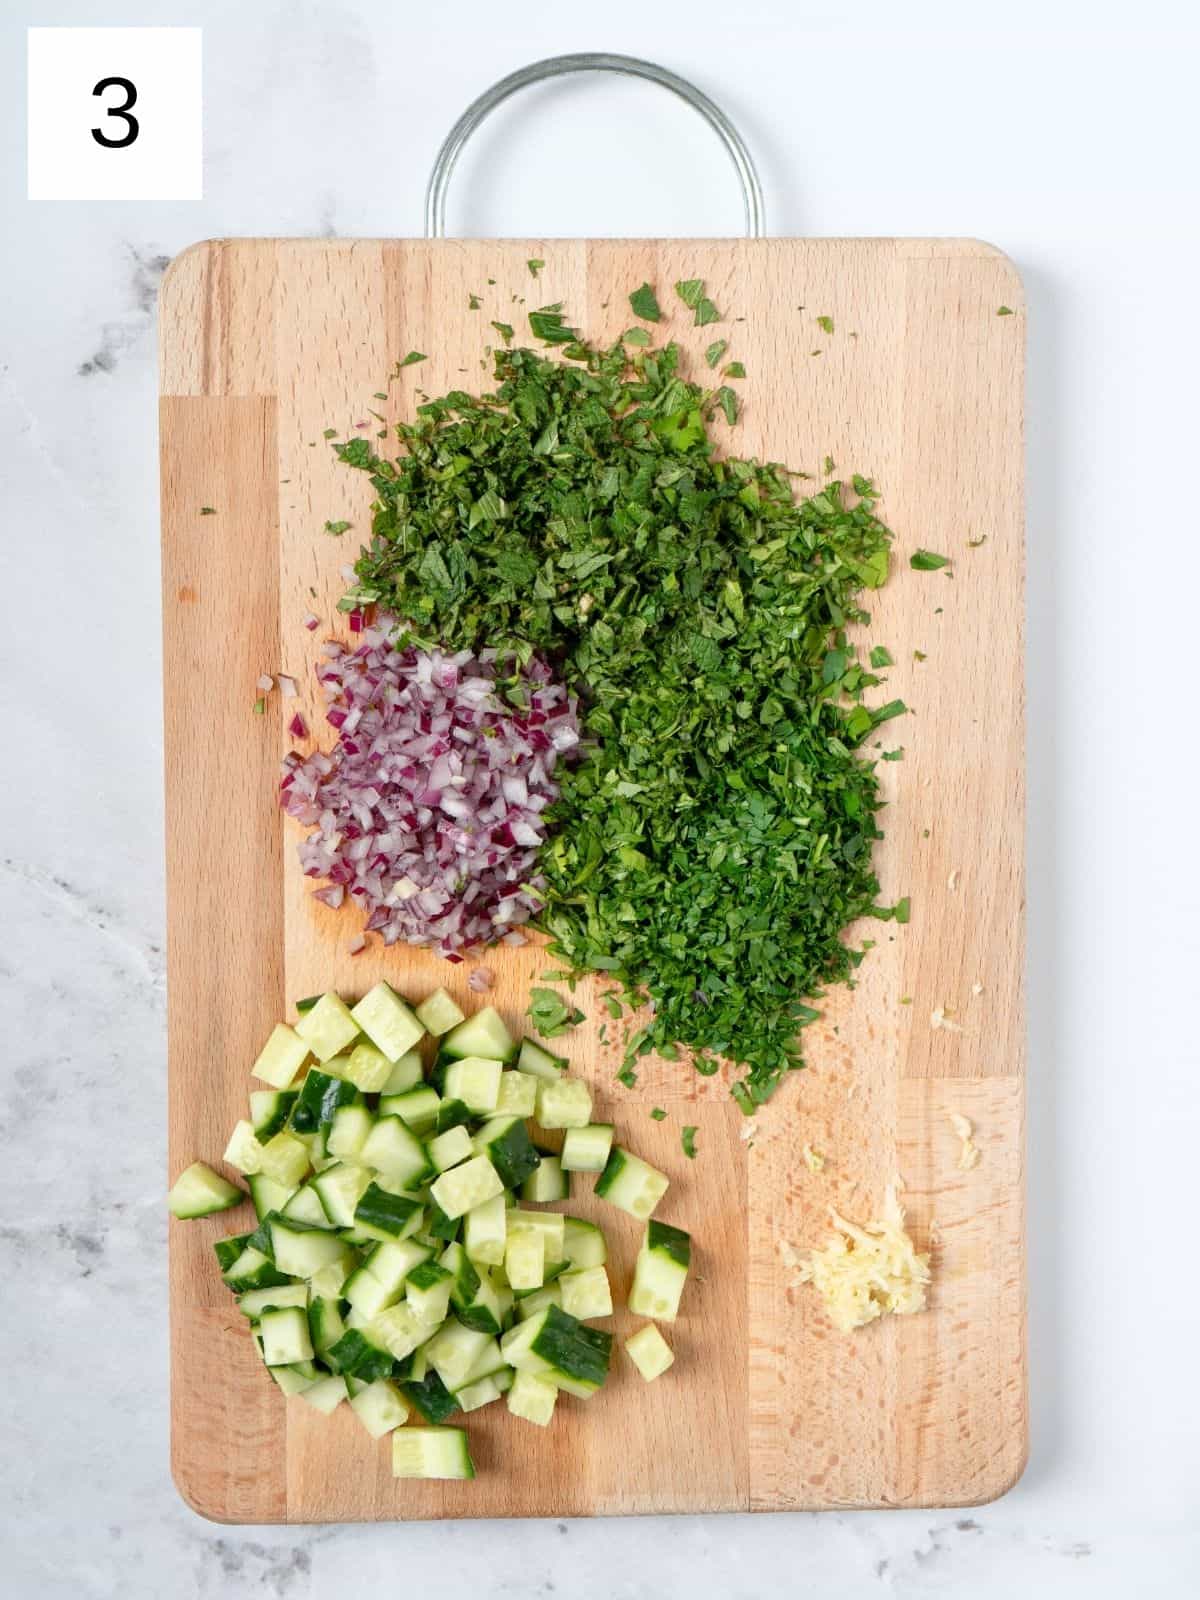 finely chopped various herbs and spices, and cucumber on a wooden chopping board.